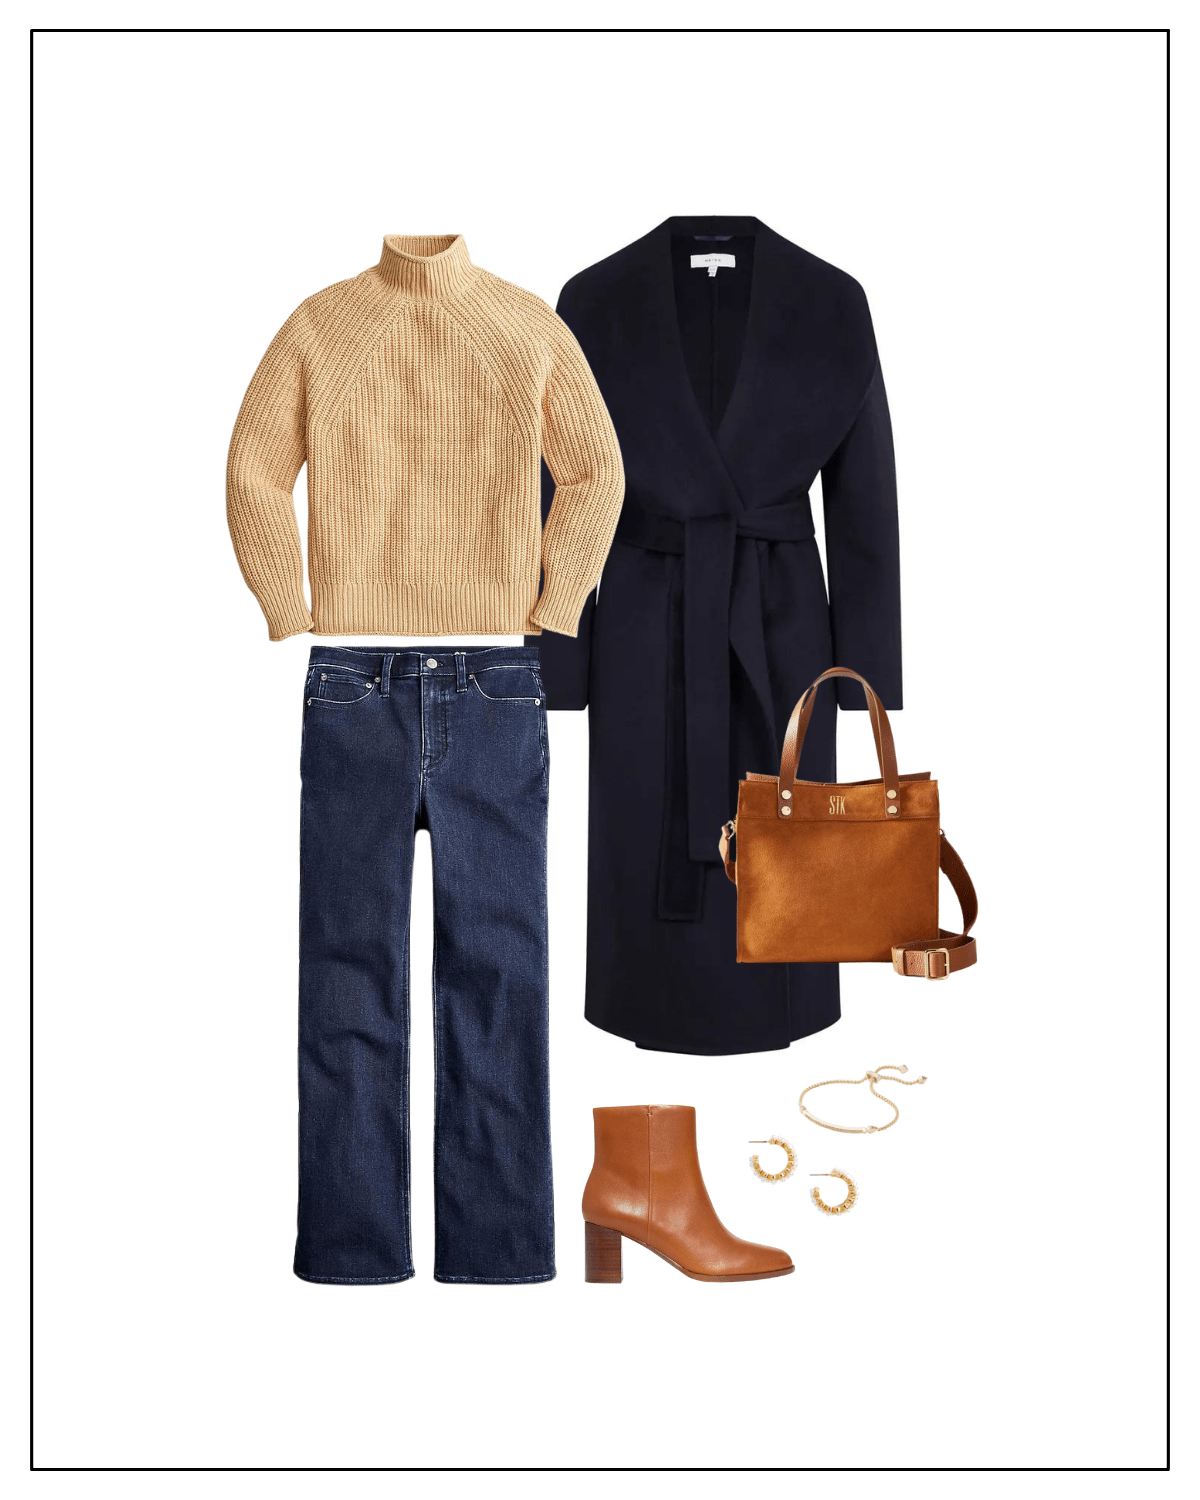 Warm Winter Outfit Ideas with turtleneck